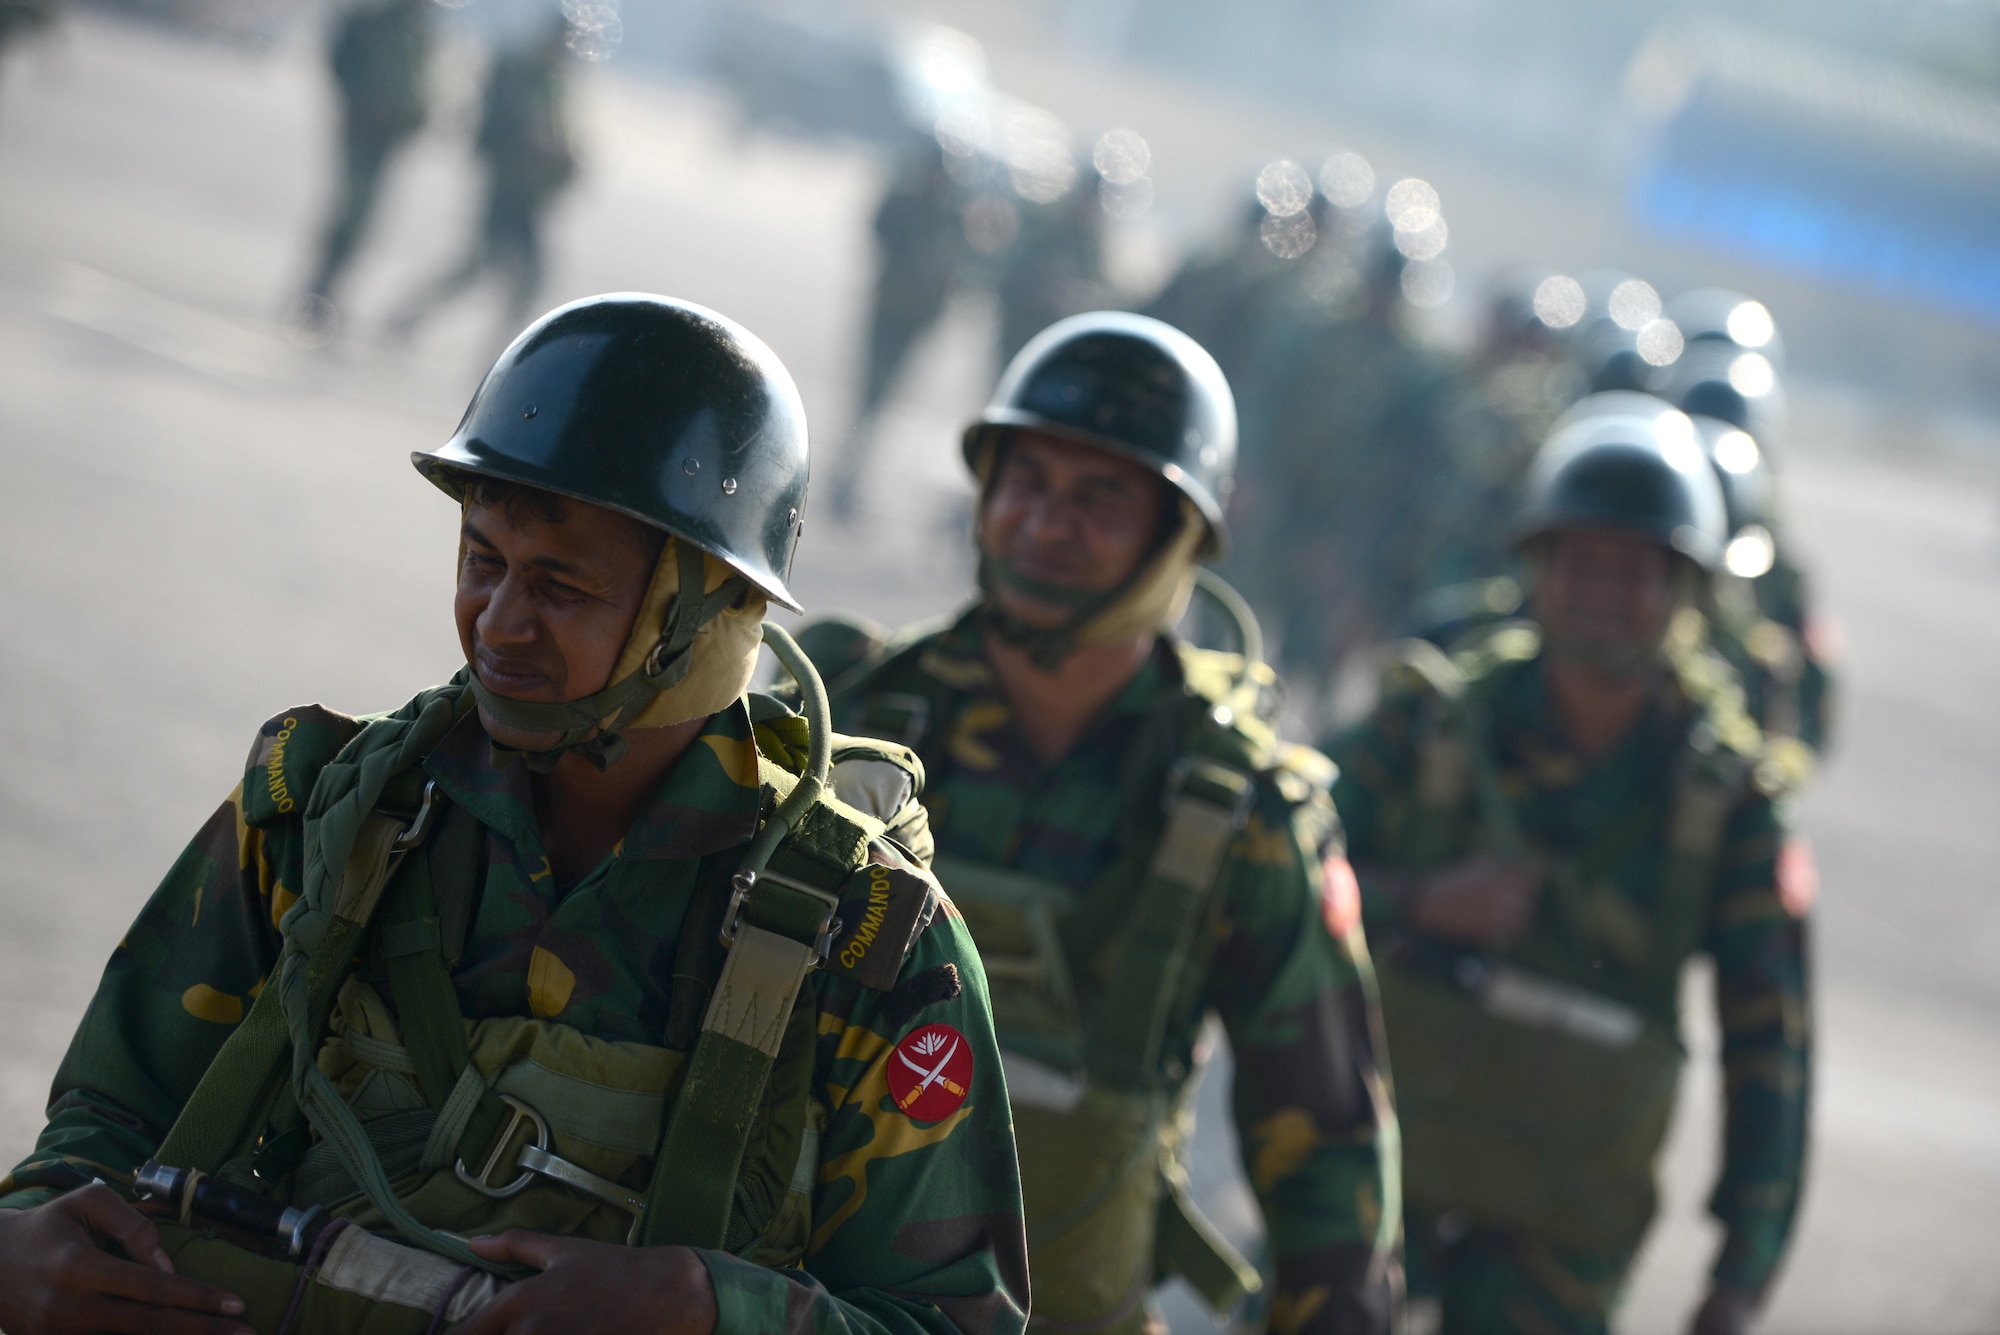 Bangladeshi commandos board a U.S. Air Force C-130H aircraft at Sylhet International Airport, Bangladesh, before conducting a personnel airdrop mission  Jan. 24, 2015 during exercise Cope South. The exercise helps cultivate common bonds, foster goodwill, and improve readiness and compatibility between members of the Bangladesh and U.S. Air Forces. (U.S. Air Force photo/1st Lt. Jake Bailey)